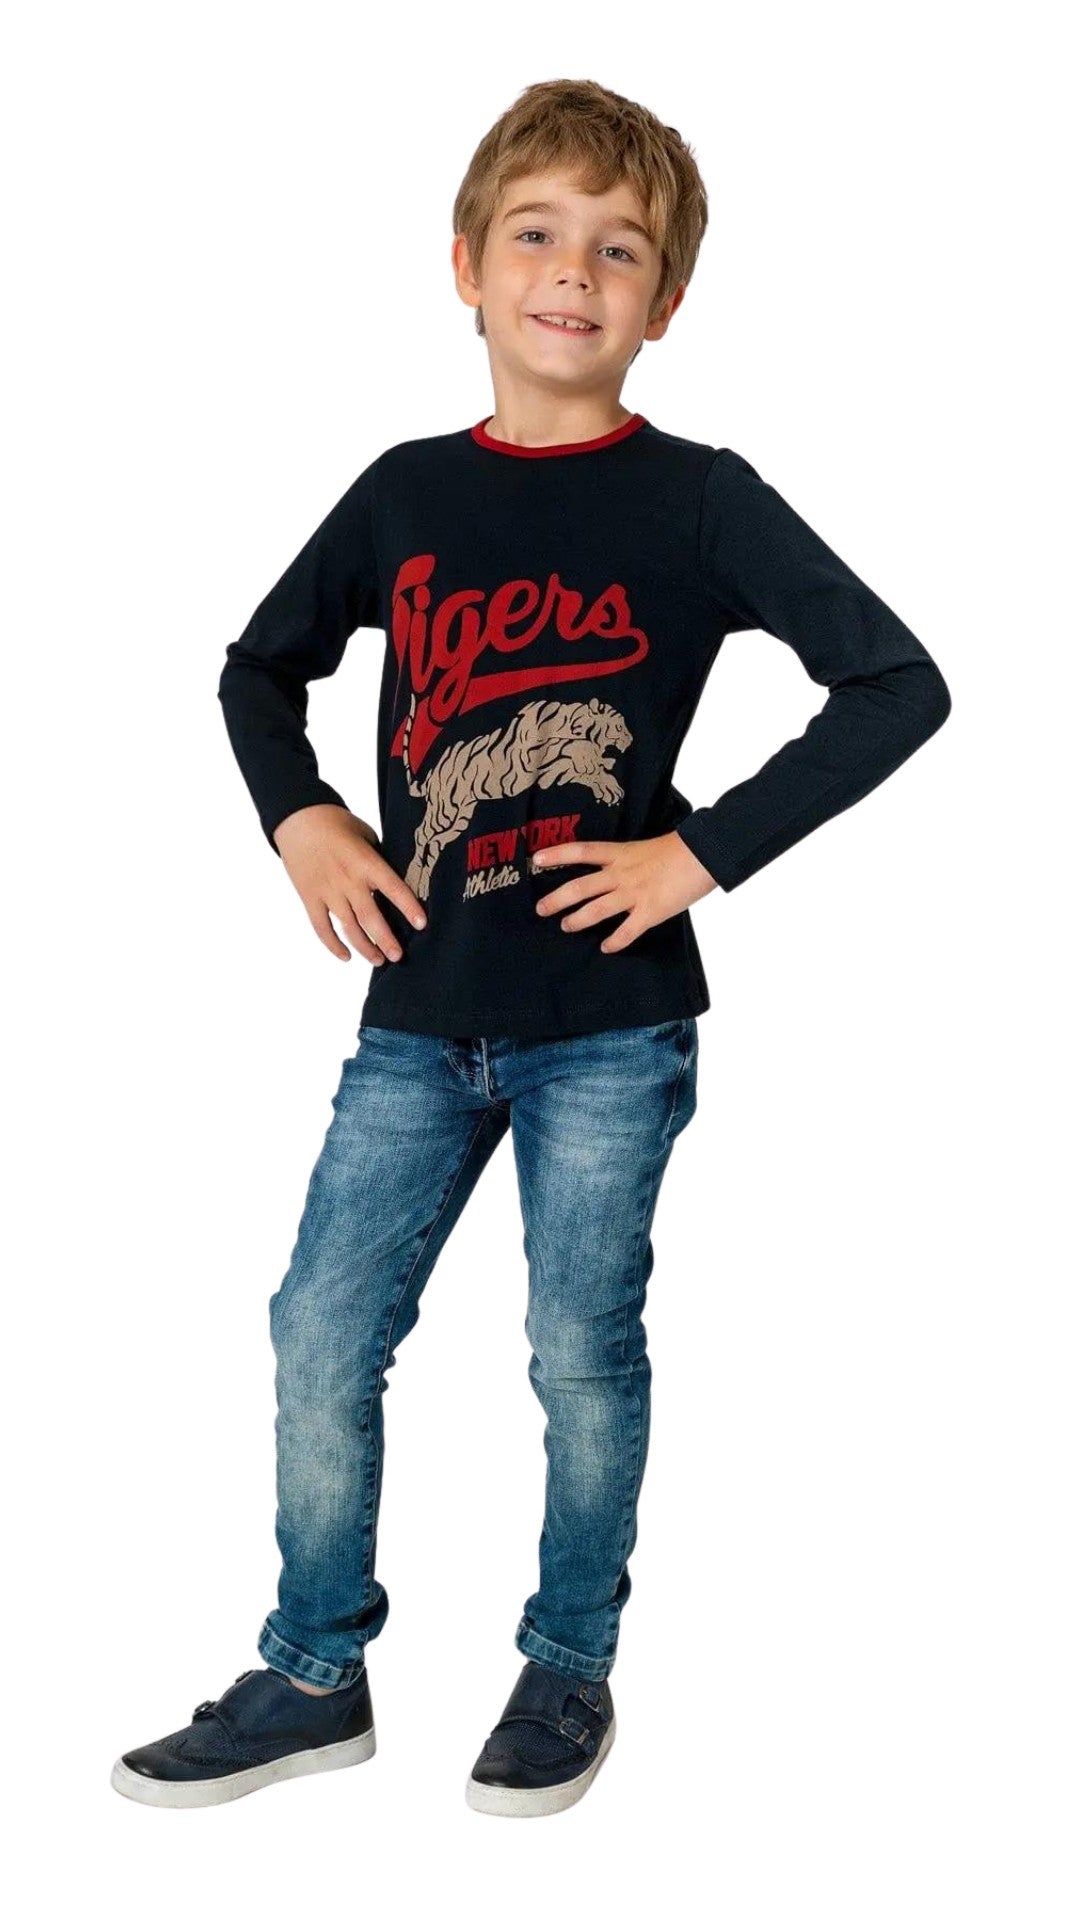 InCity Boys Tween 7-14 Years Red White Gray Long Sleeve Round Neck Comfy Casual Canadian Long Sleeve T-Shirt InCity Boys & Girls